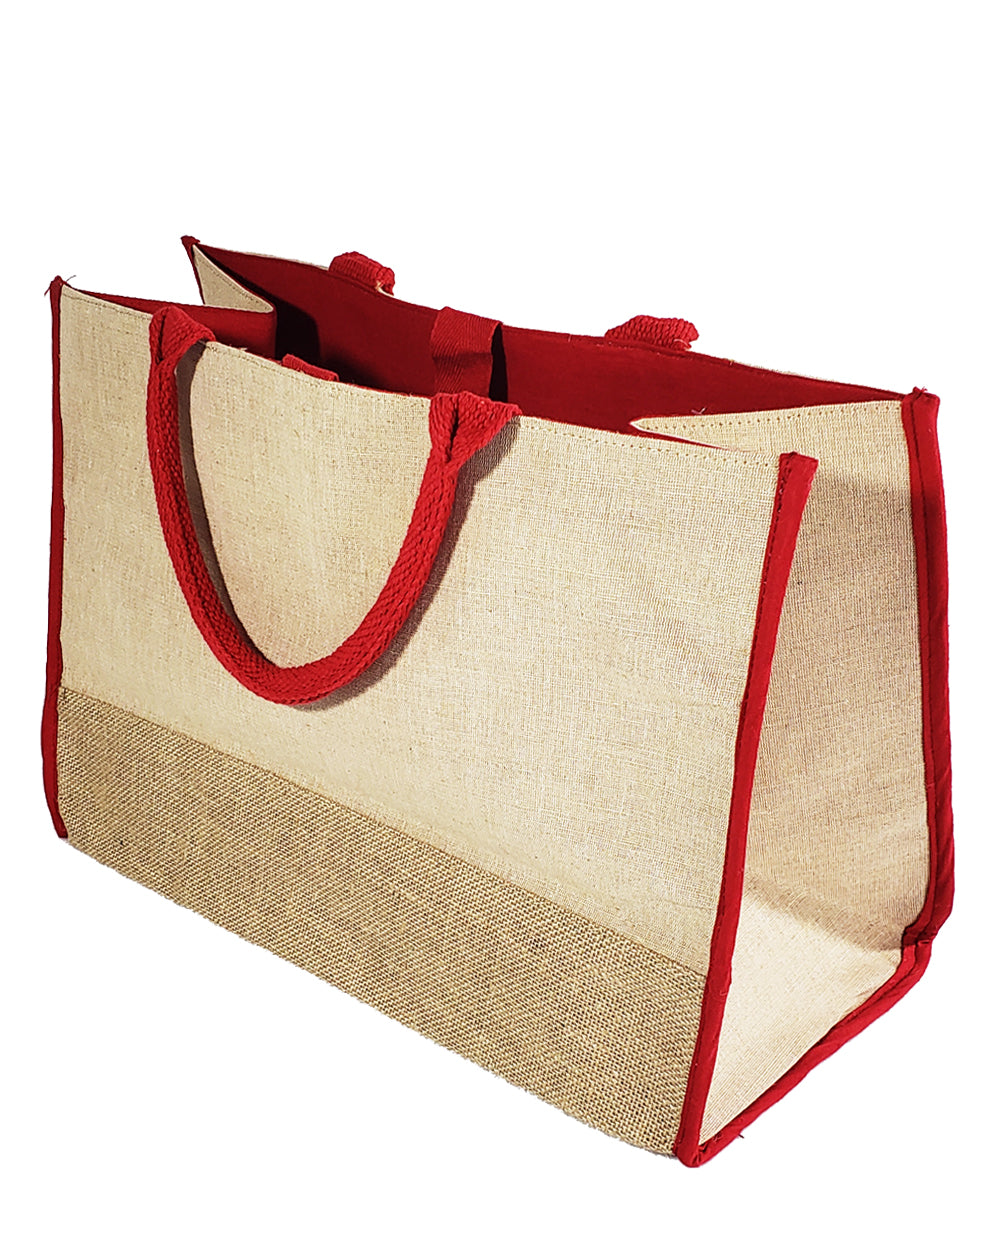 Amazon.com: Moroccan Tiles Design Jute Tote Bag Reusable Grocery Shopping  Bag Burlap Beach Bag Market Bags With Handle for Wedding Party Gift DIY  12.6 x 14.2 x 7.1 inch : Clothing, Shoes & Jewelry